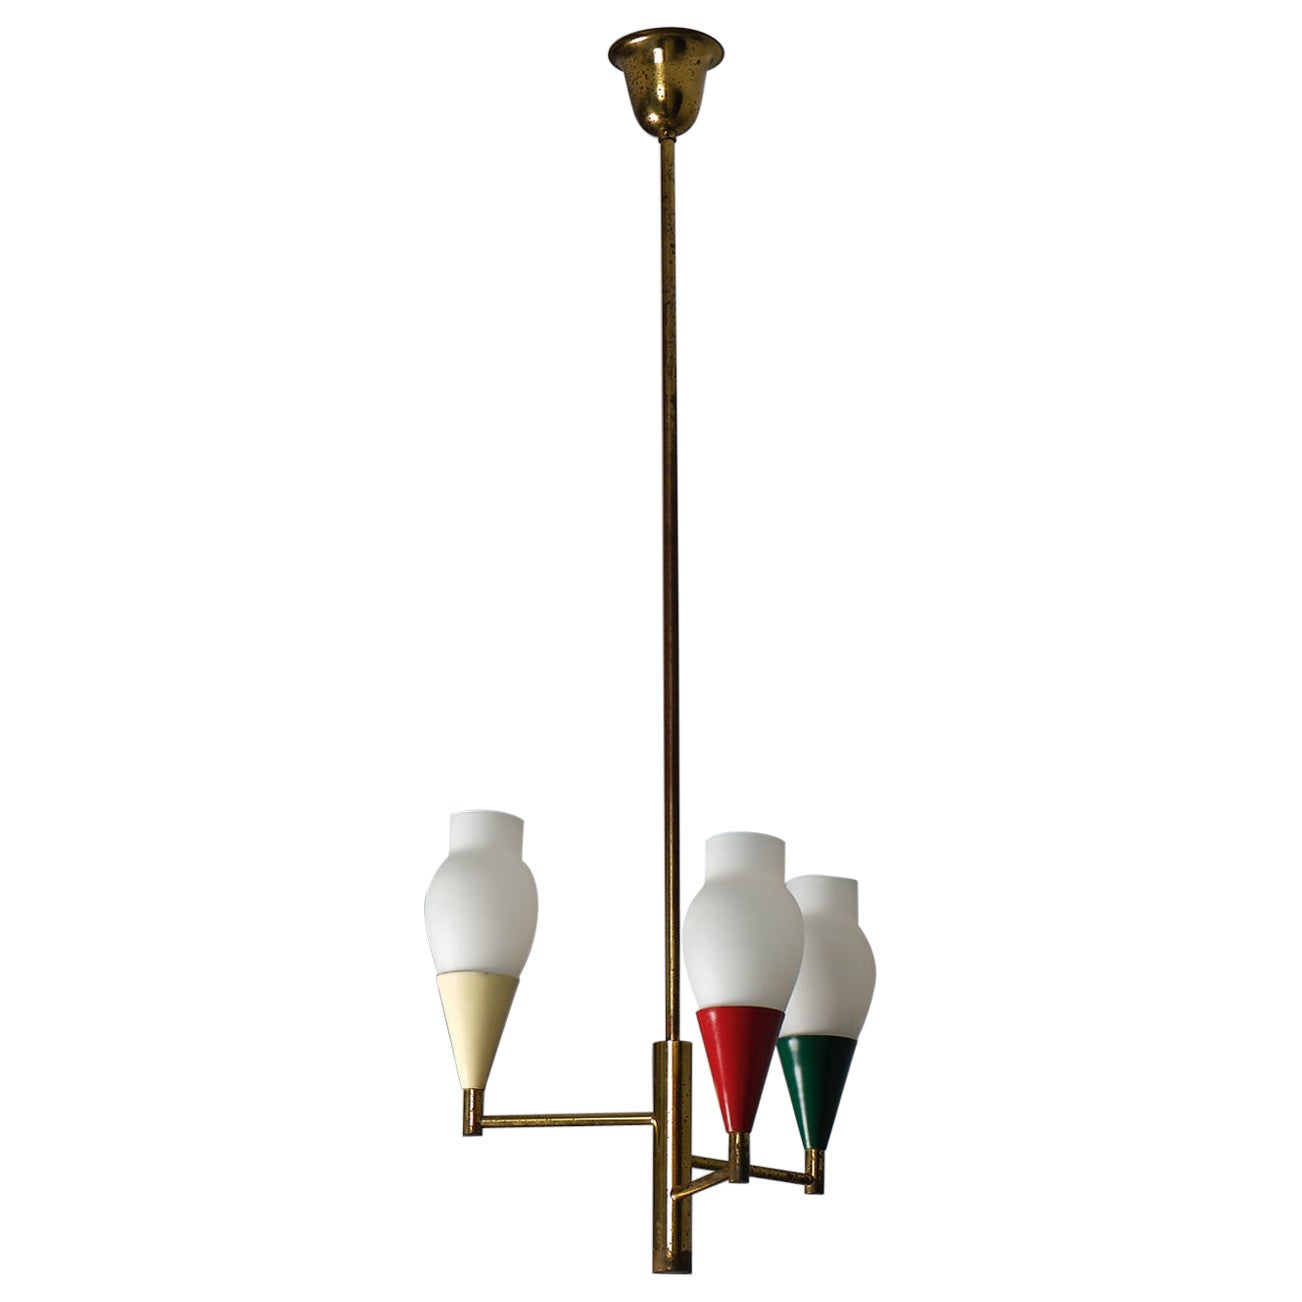 1950s Italian Brass Chandelier with Modern Design and Colorful Metal Accents